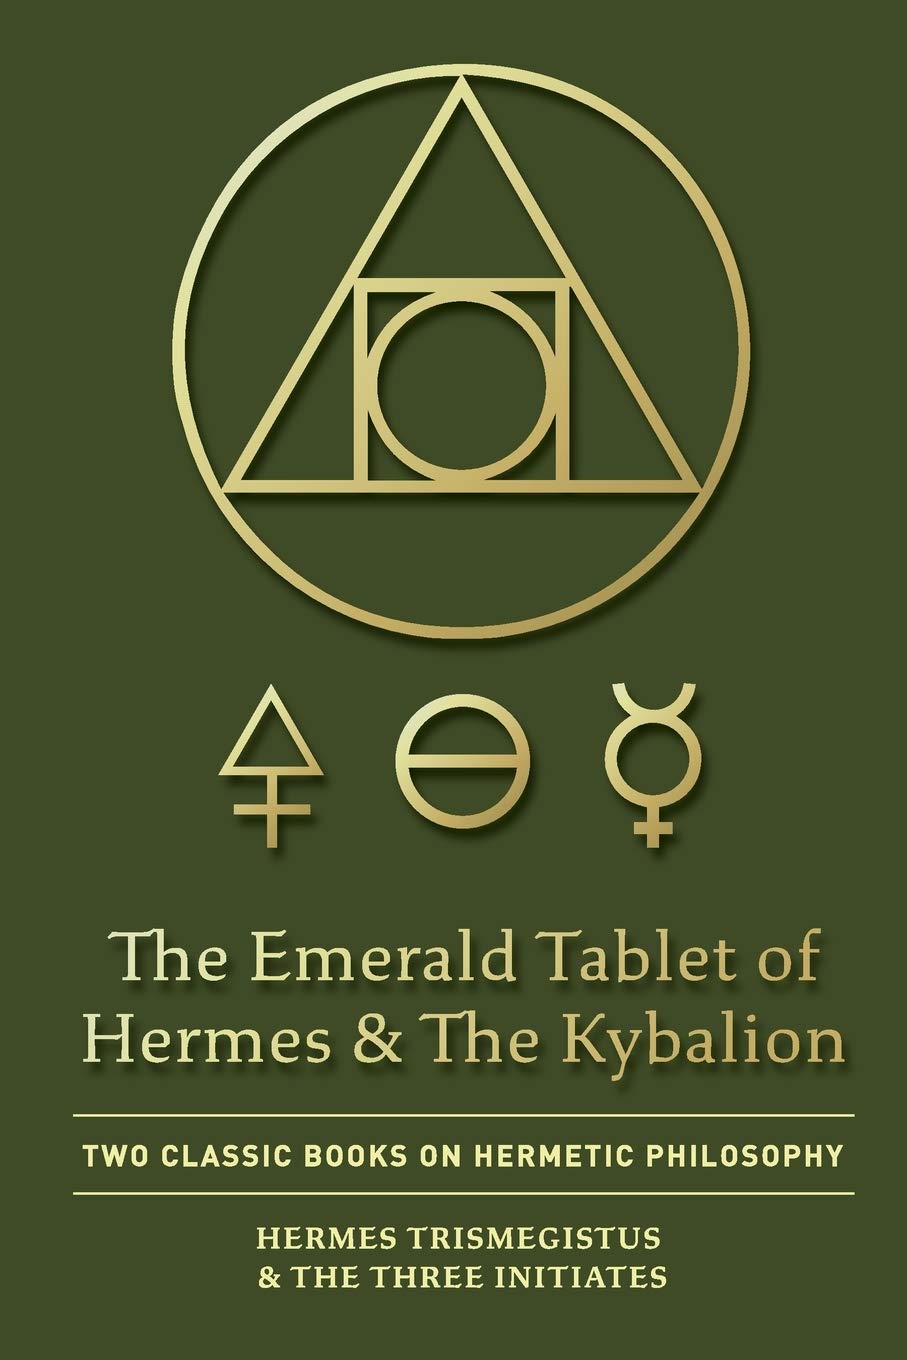 The Emerald Tablet of Hermes & The Kybalion: Two Classic Books on Hermetic Philosophy by Hermes Trismegistus